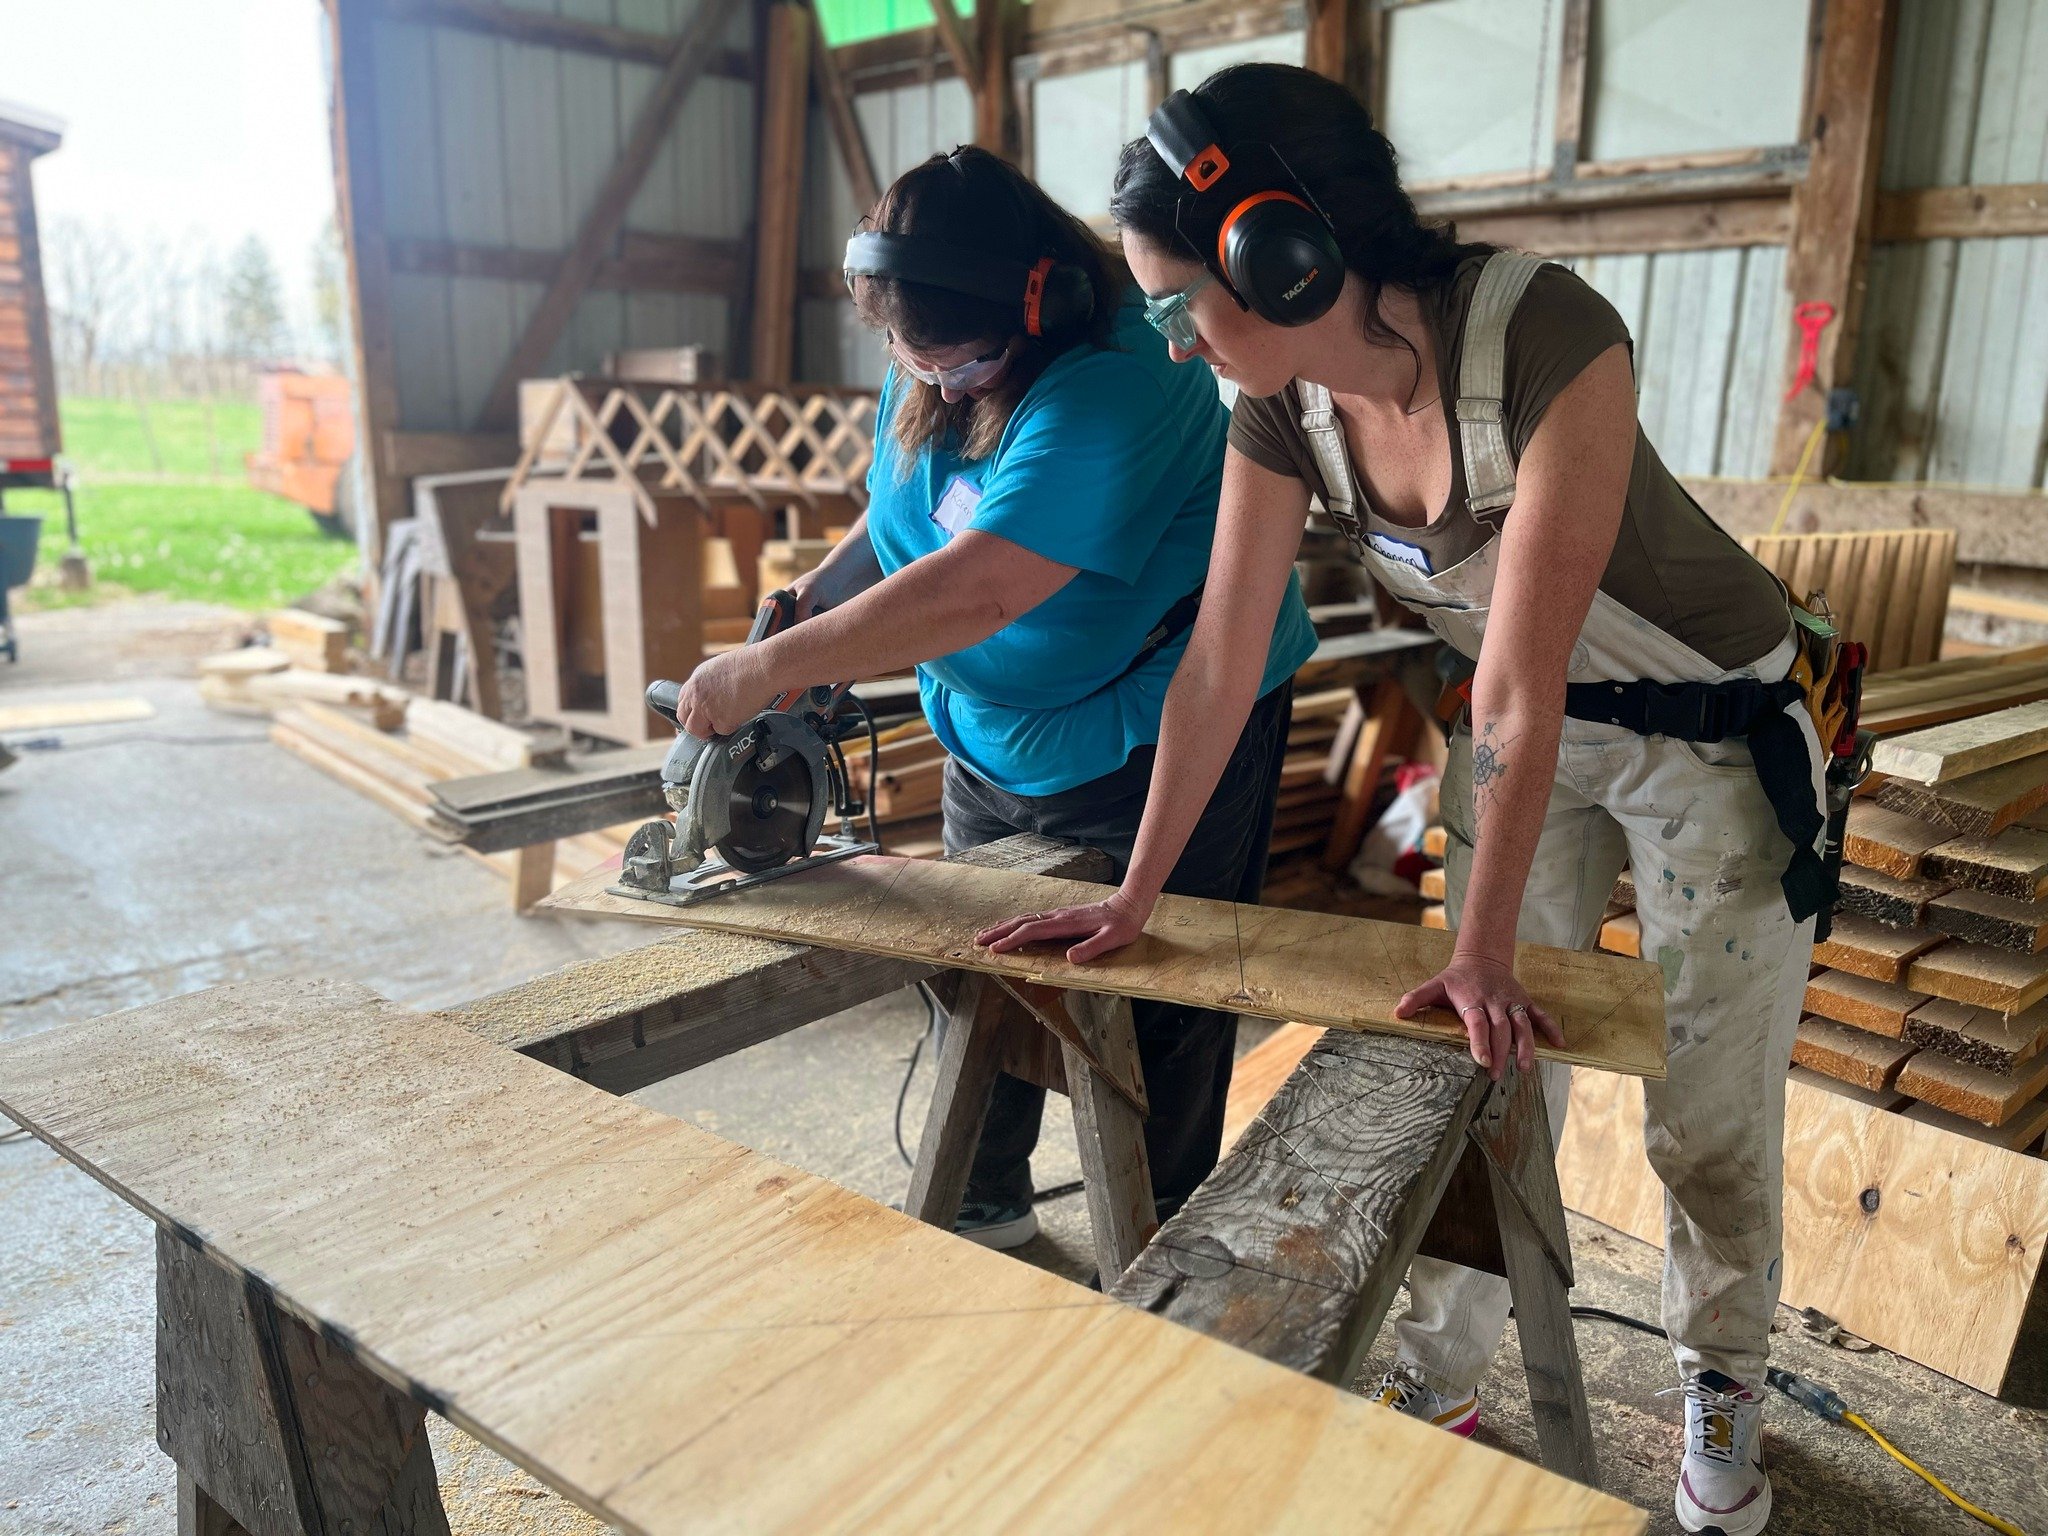 Seeing moms and daughters learn carpentry together is always a beautiful thing. Happy Mother's Day, everyone! ❤️

#carpentryforwomen #mothersday #builtbyhand #keepcraftalive #ithaca #trumansburg